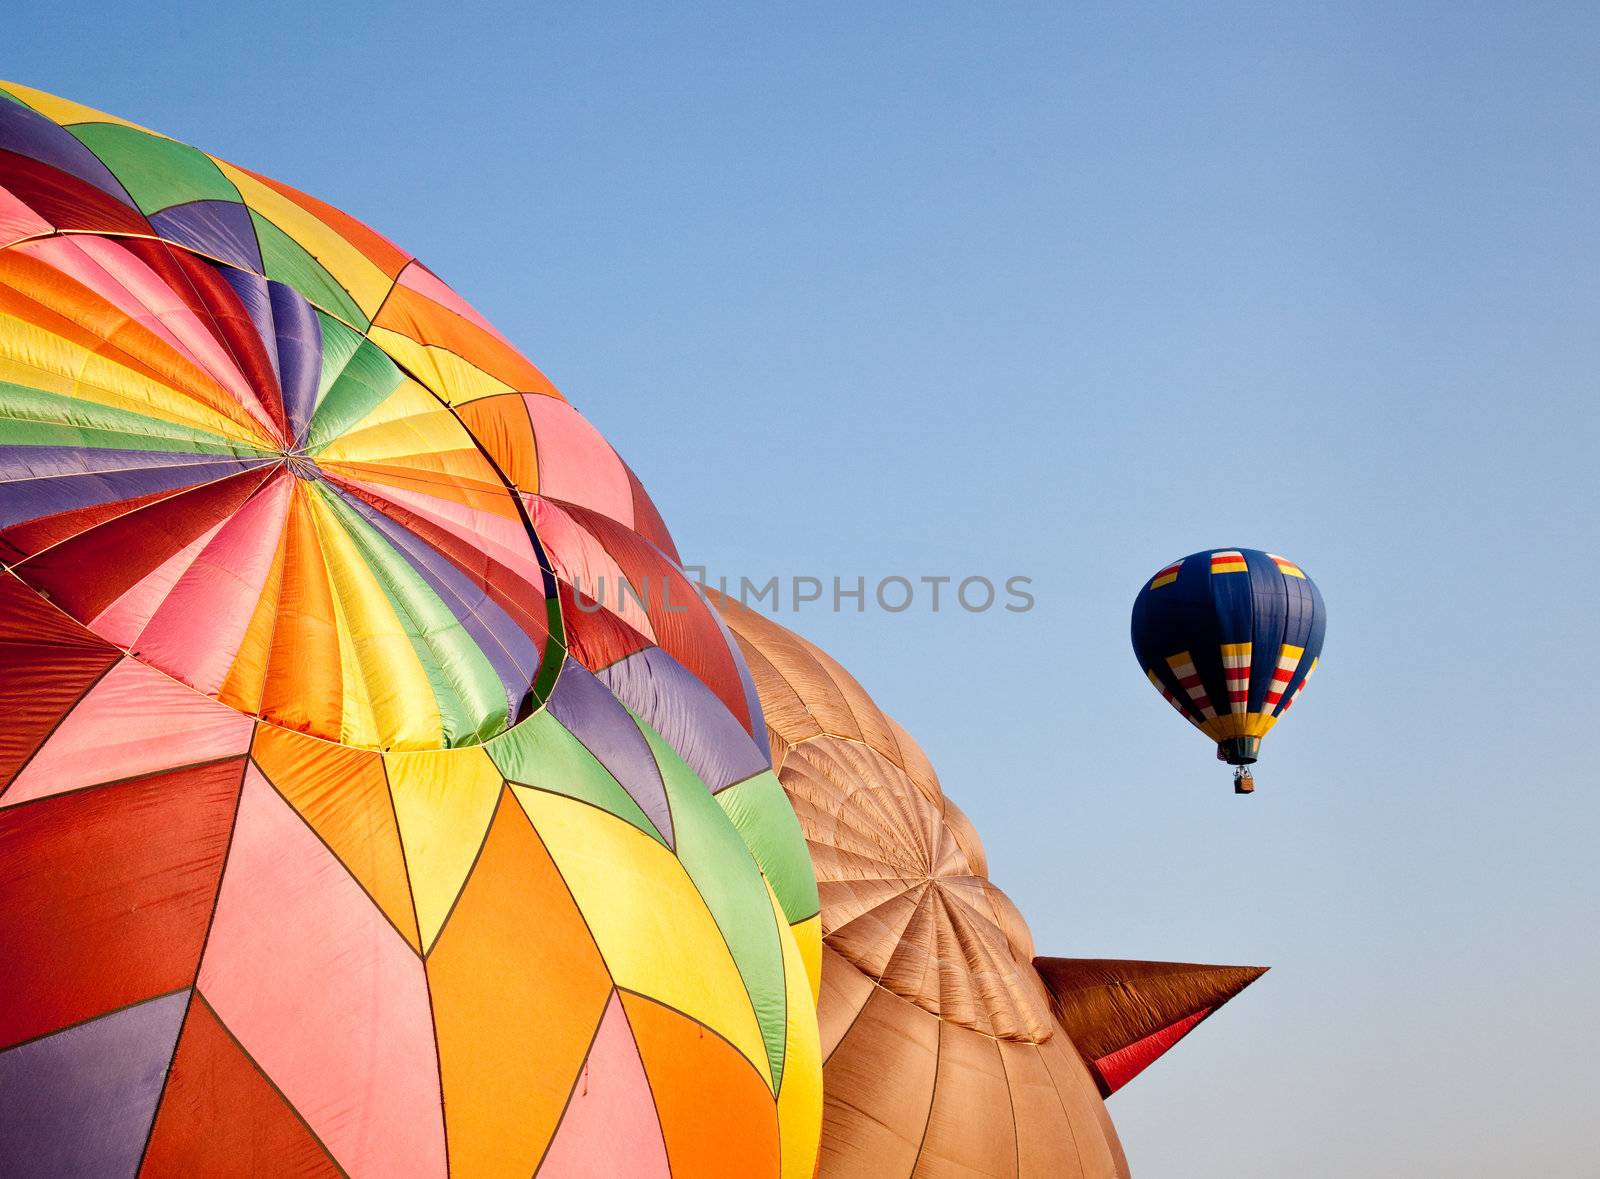 Single hot air balloon soaring into the sky above two others being inflated on the ground